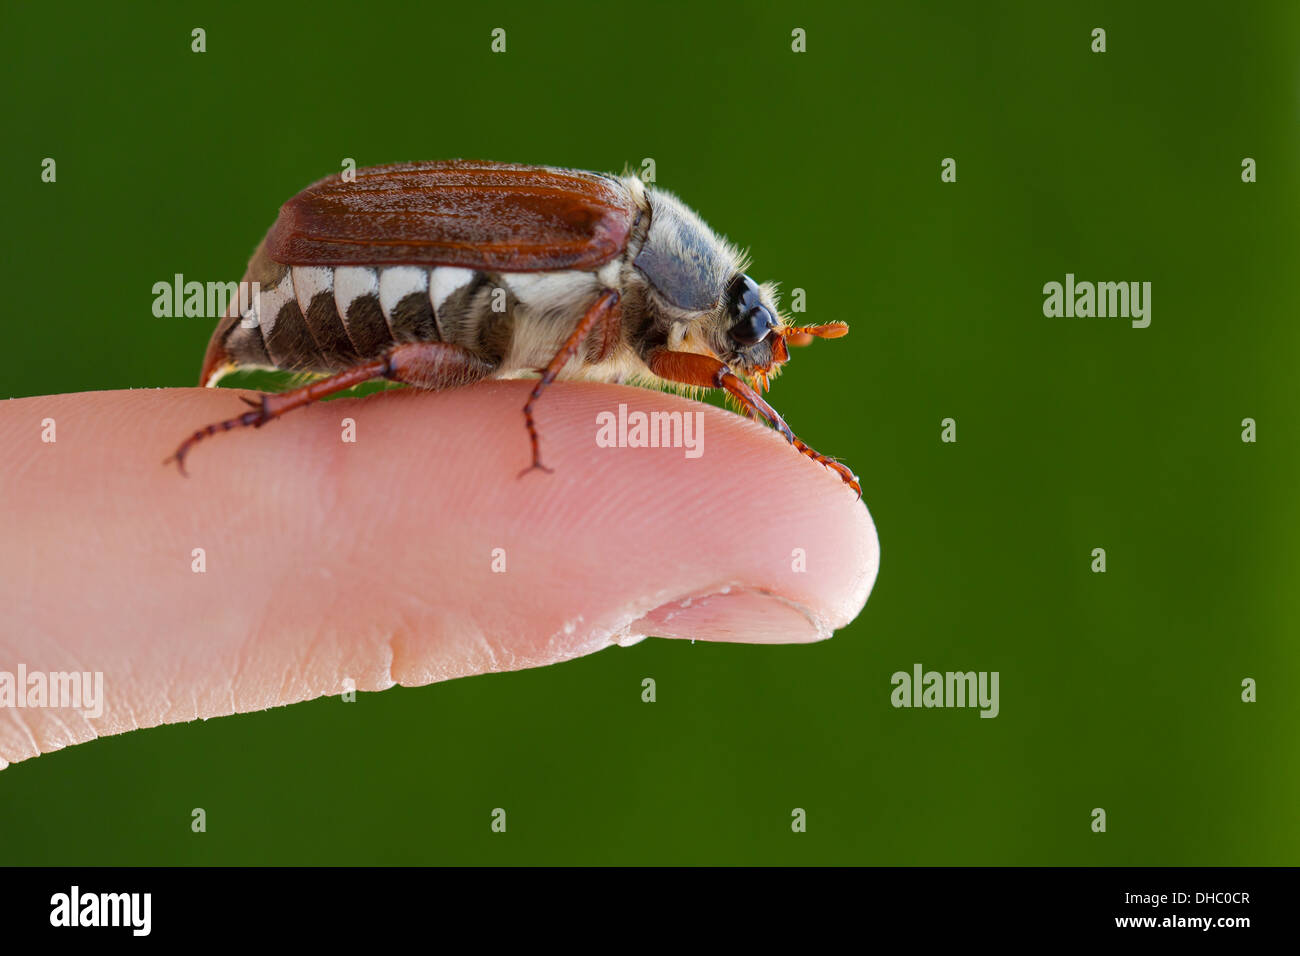 Common cockchafer / May bug (Melolontha melolontha) on finger Stock Photo